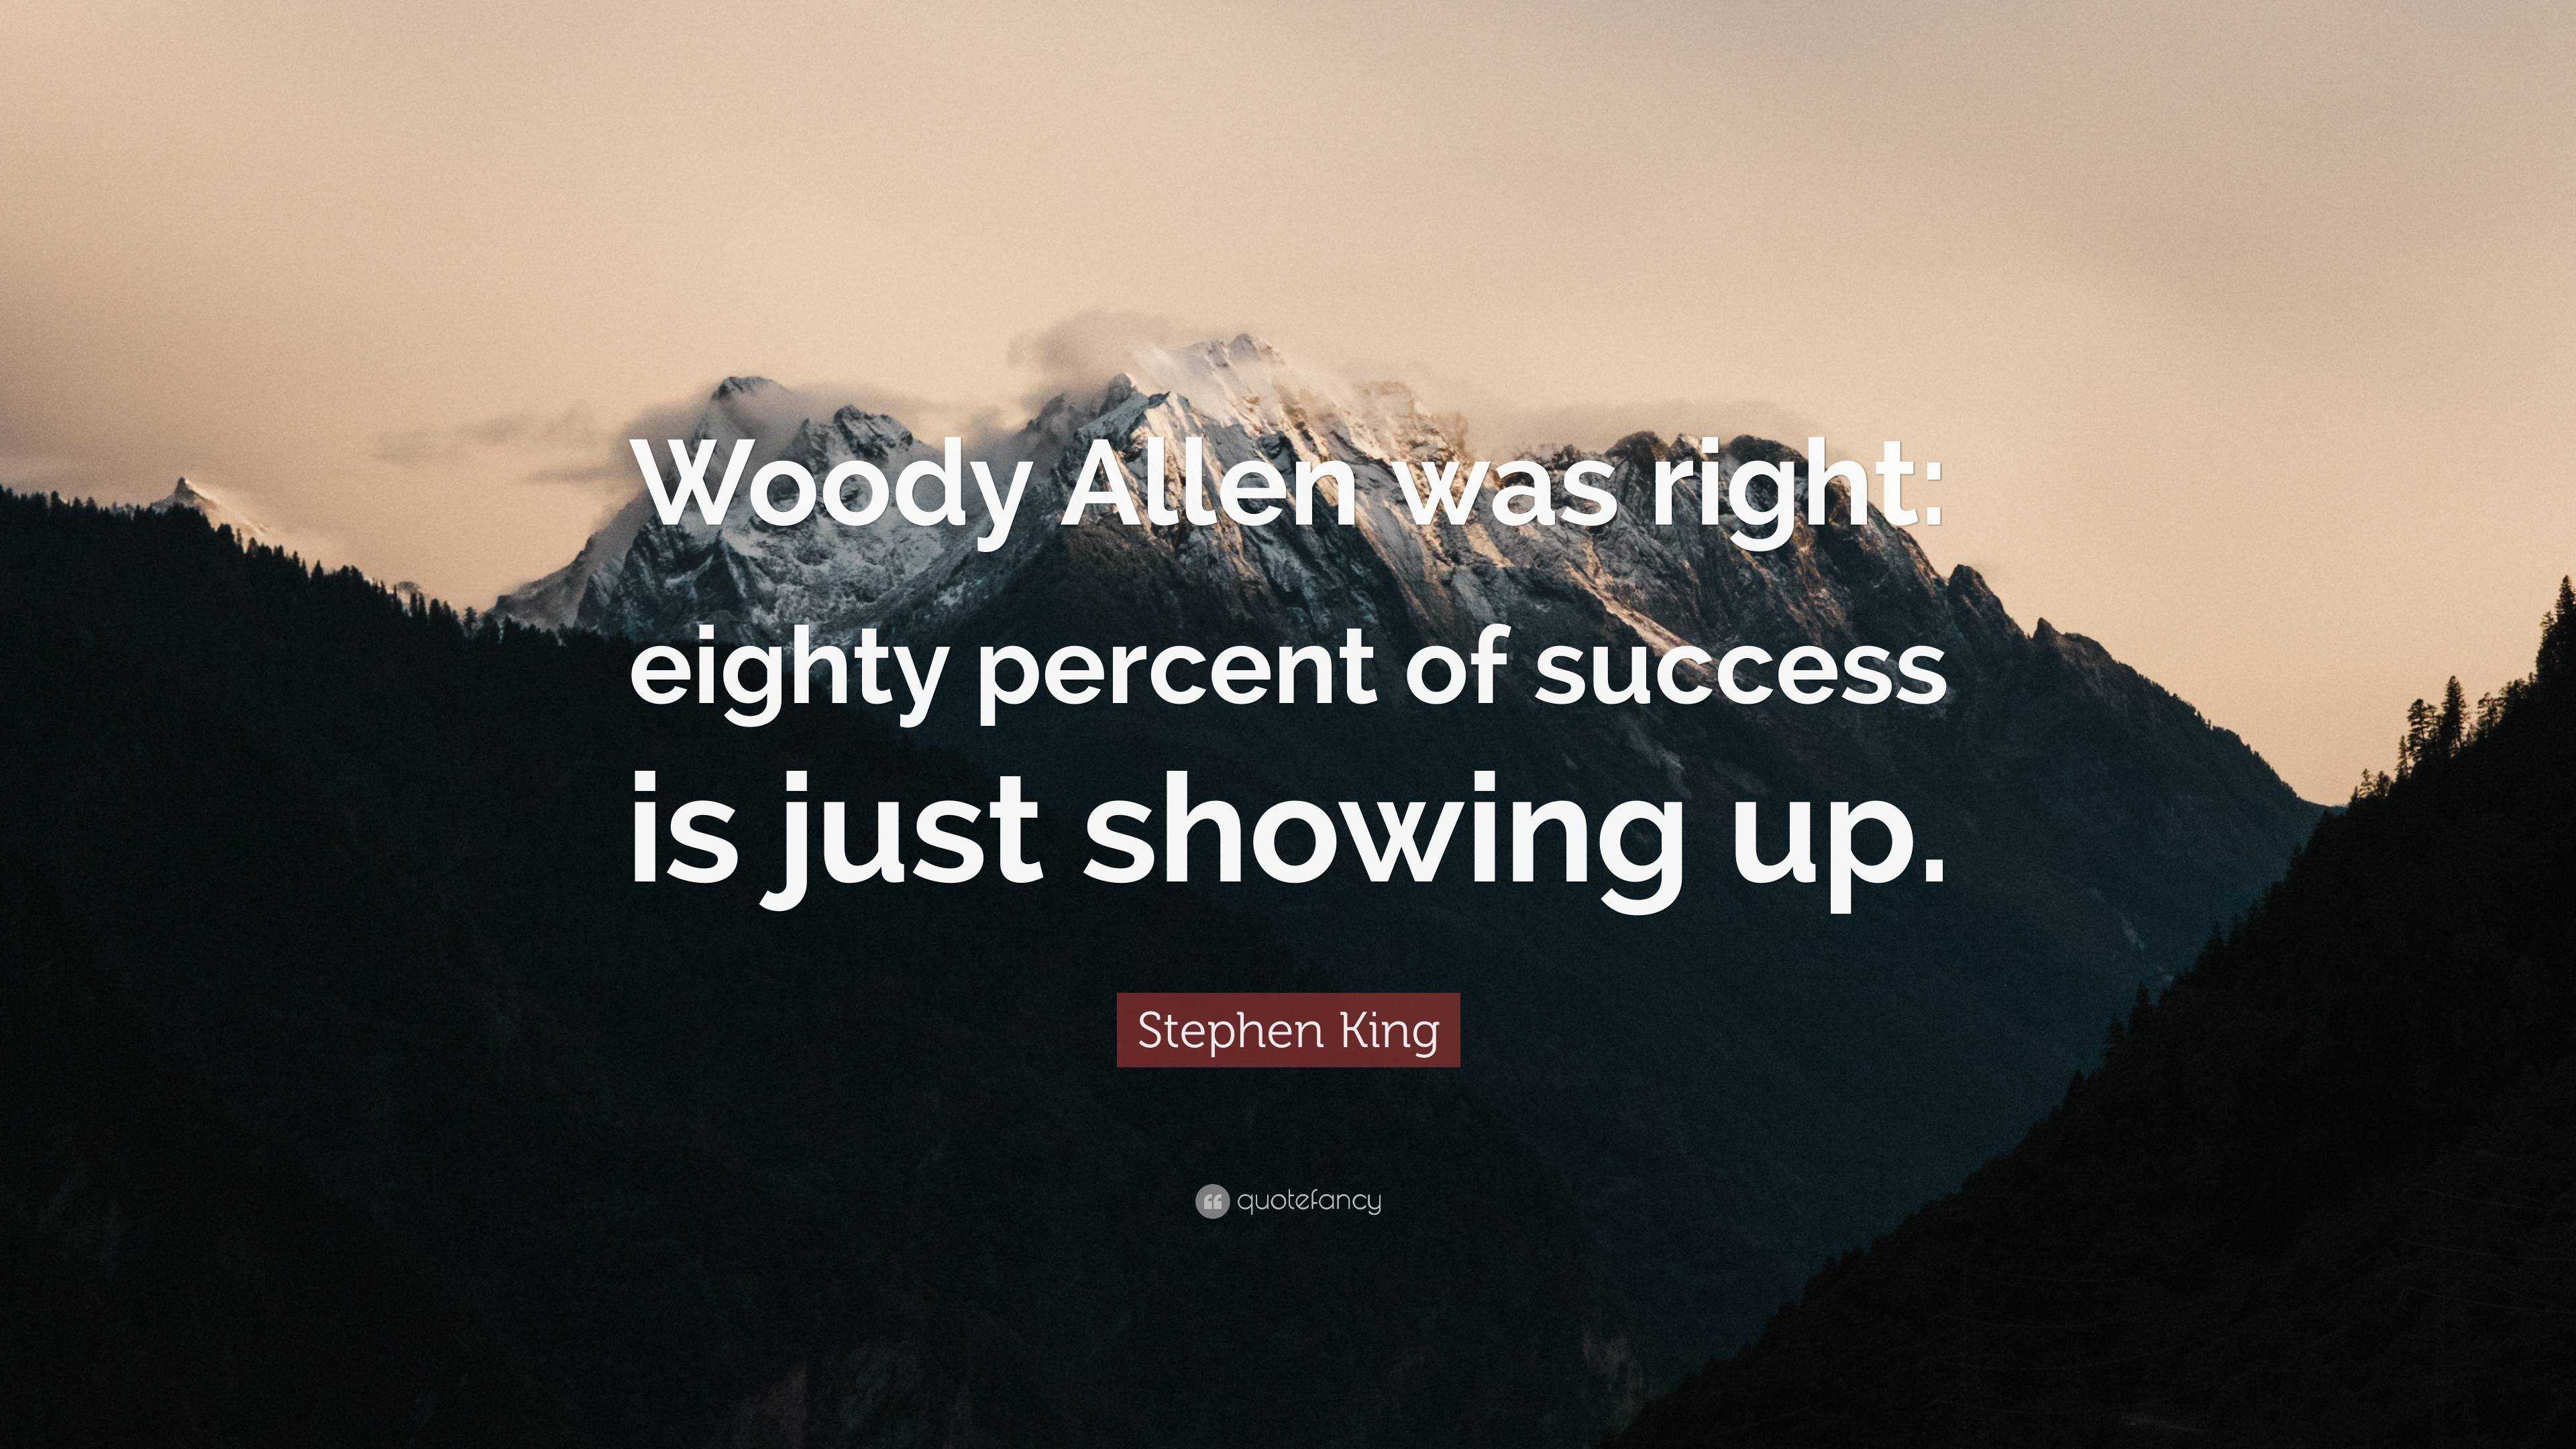 Stephen King Quote “woody Allen Was Right Eighty Percent Of Success Is Just Showing Up” 5623